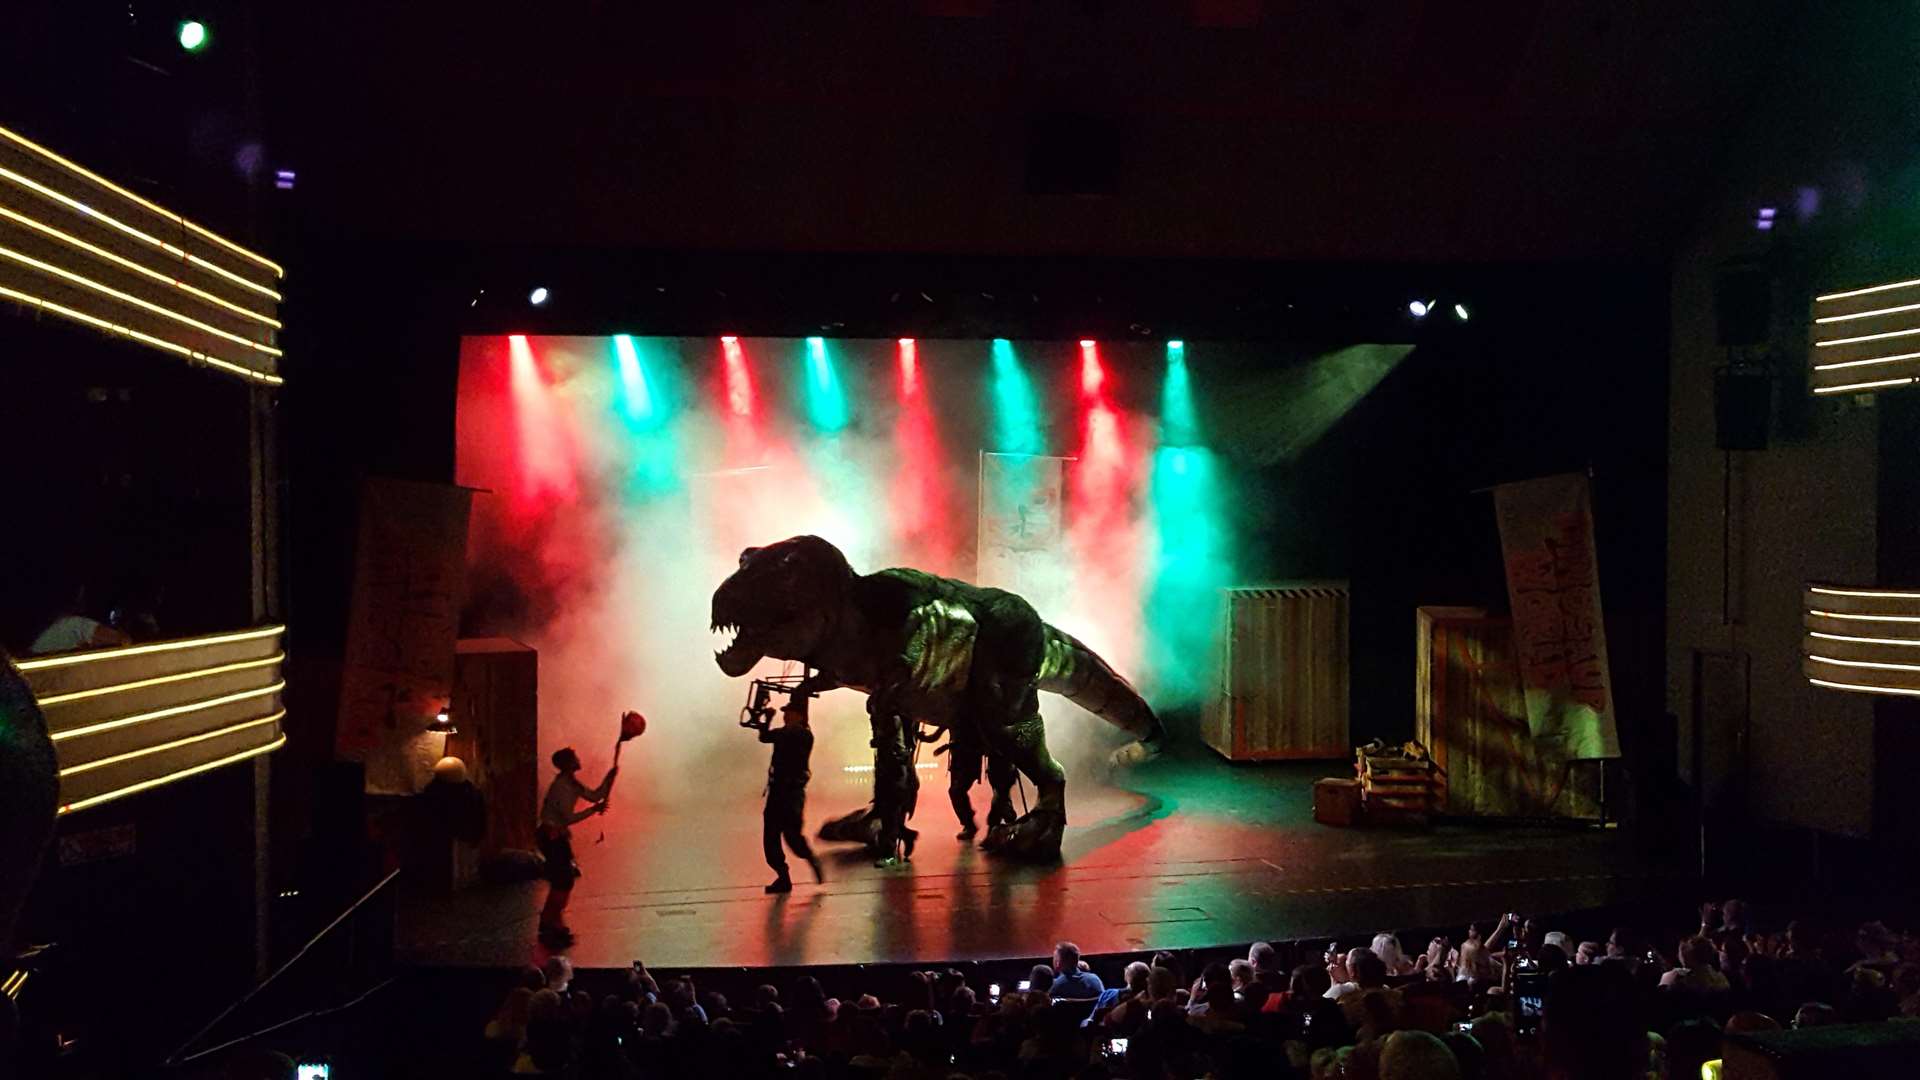 The T-Rex was a big hit with the young audience